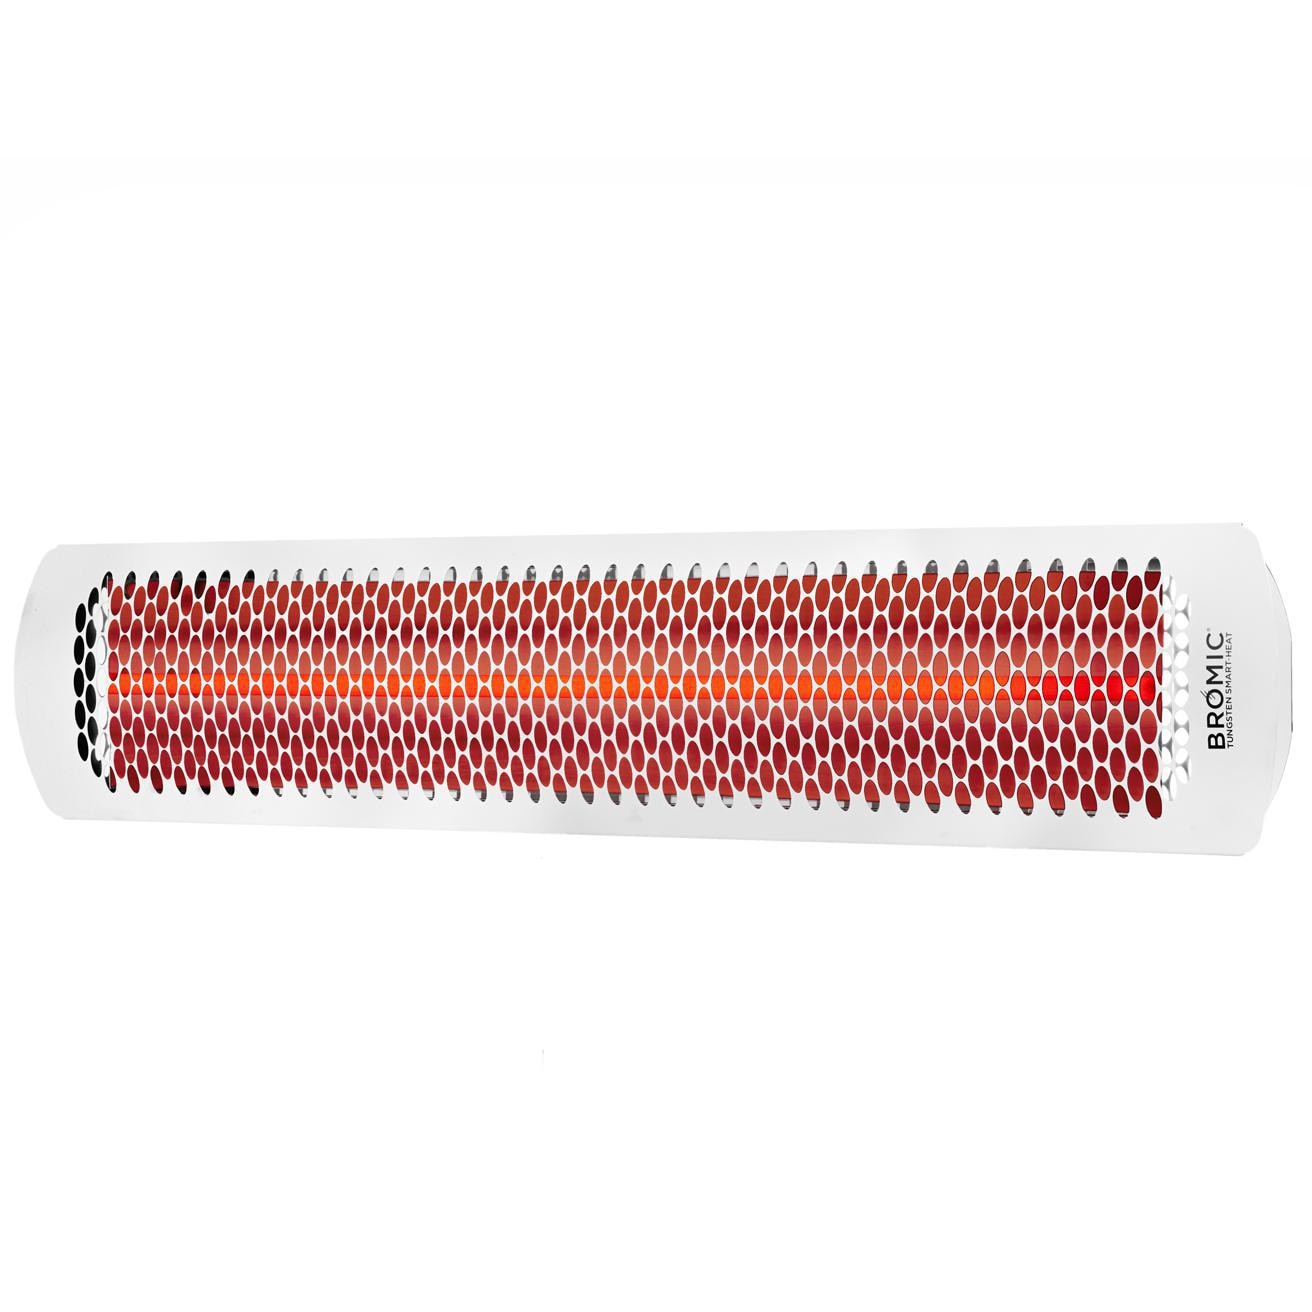 Bromic Heating - Tungsten Smart-Heat 44-Inch 4000W Dual Element 240V Electric Infrared Patio Heater - White